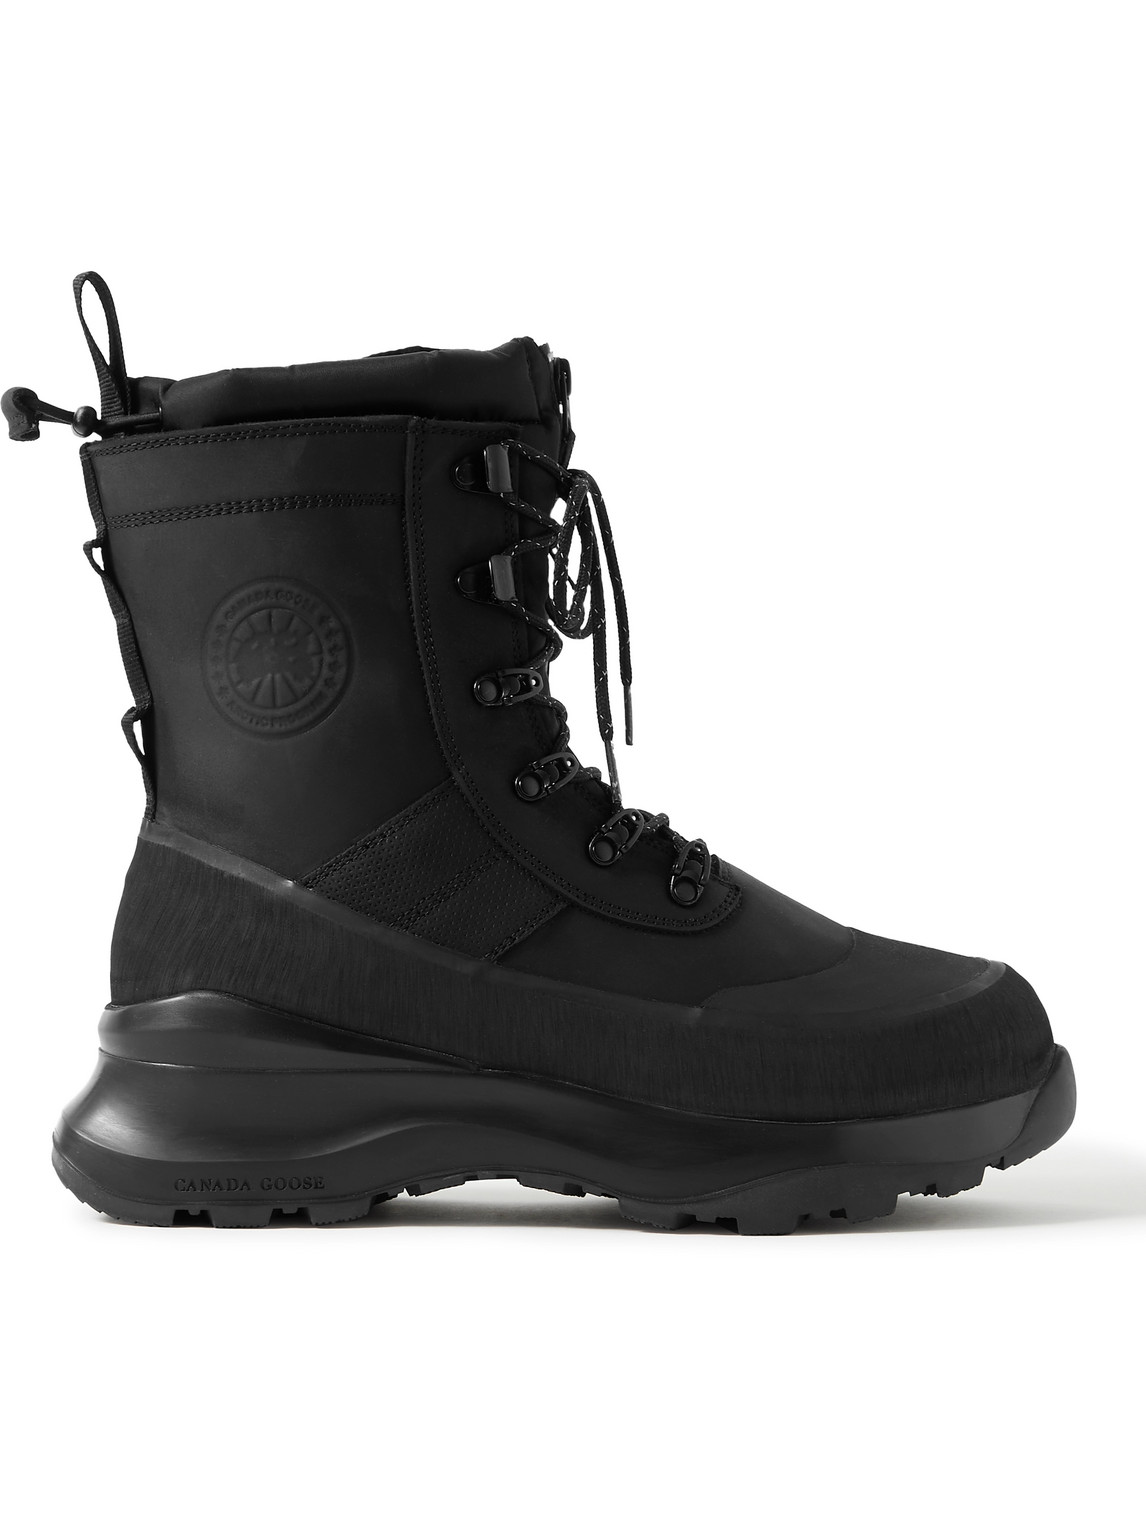 Armstrong Rubber-Trimmed Nubuck Boots